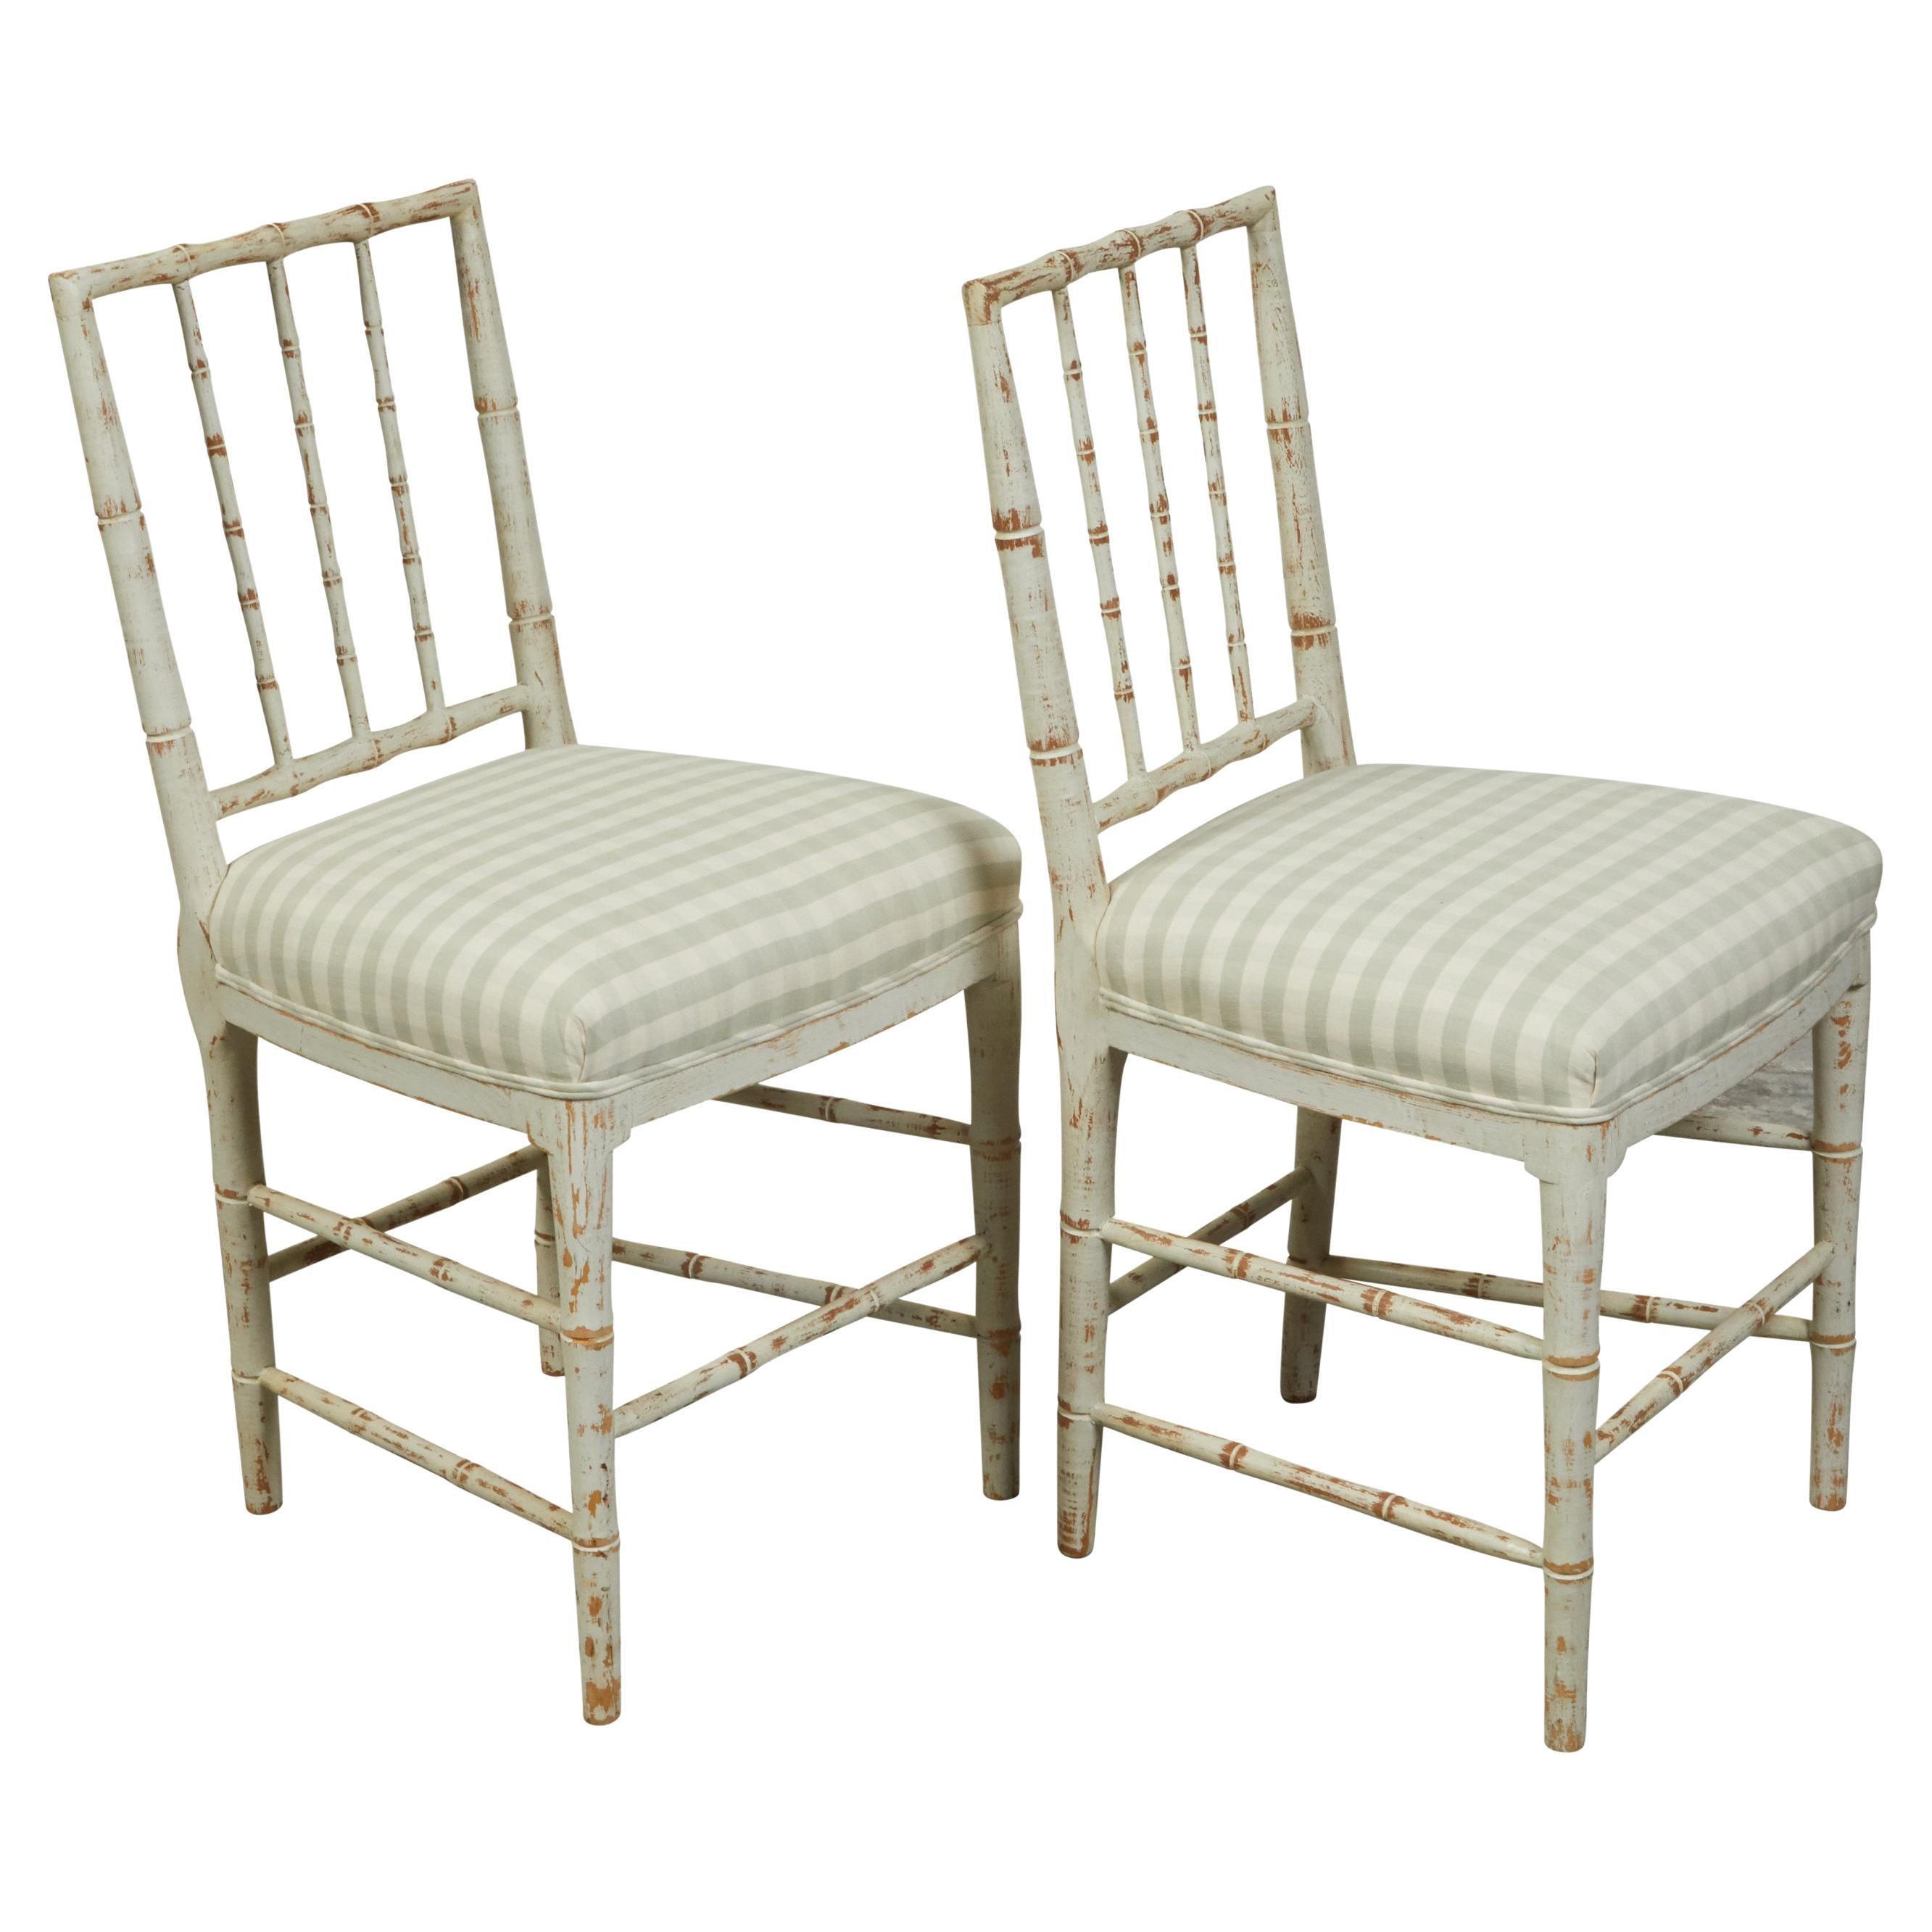 Pair of French Midcentury Faux Bamboo Side Chairs with Distressed Patina For Sale